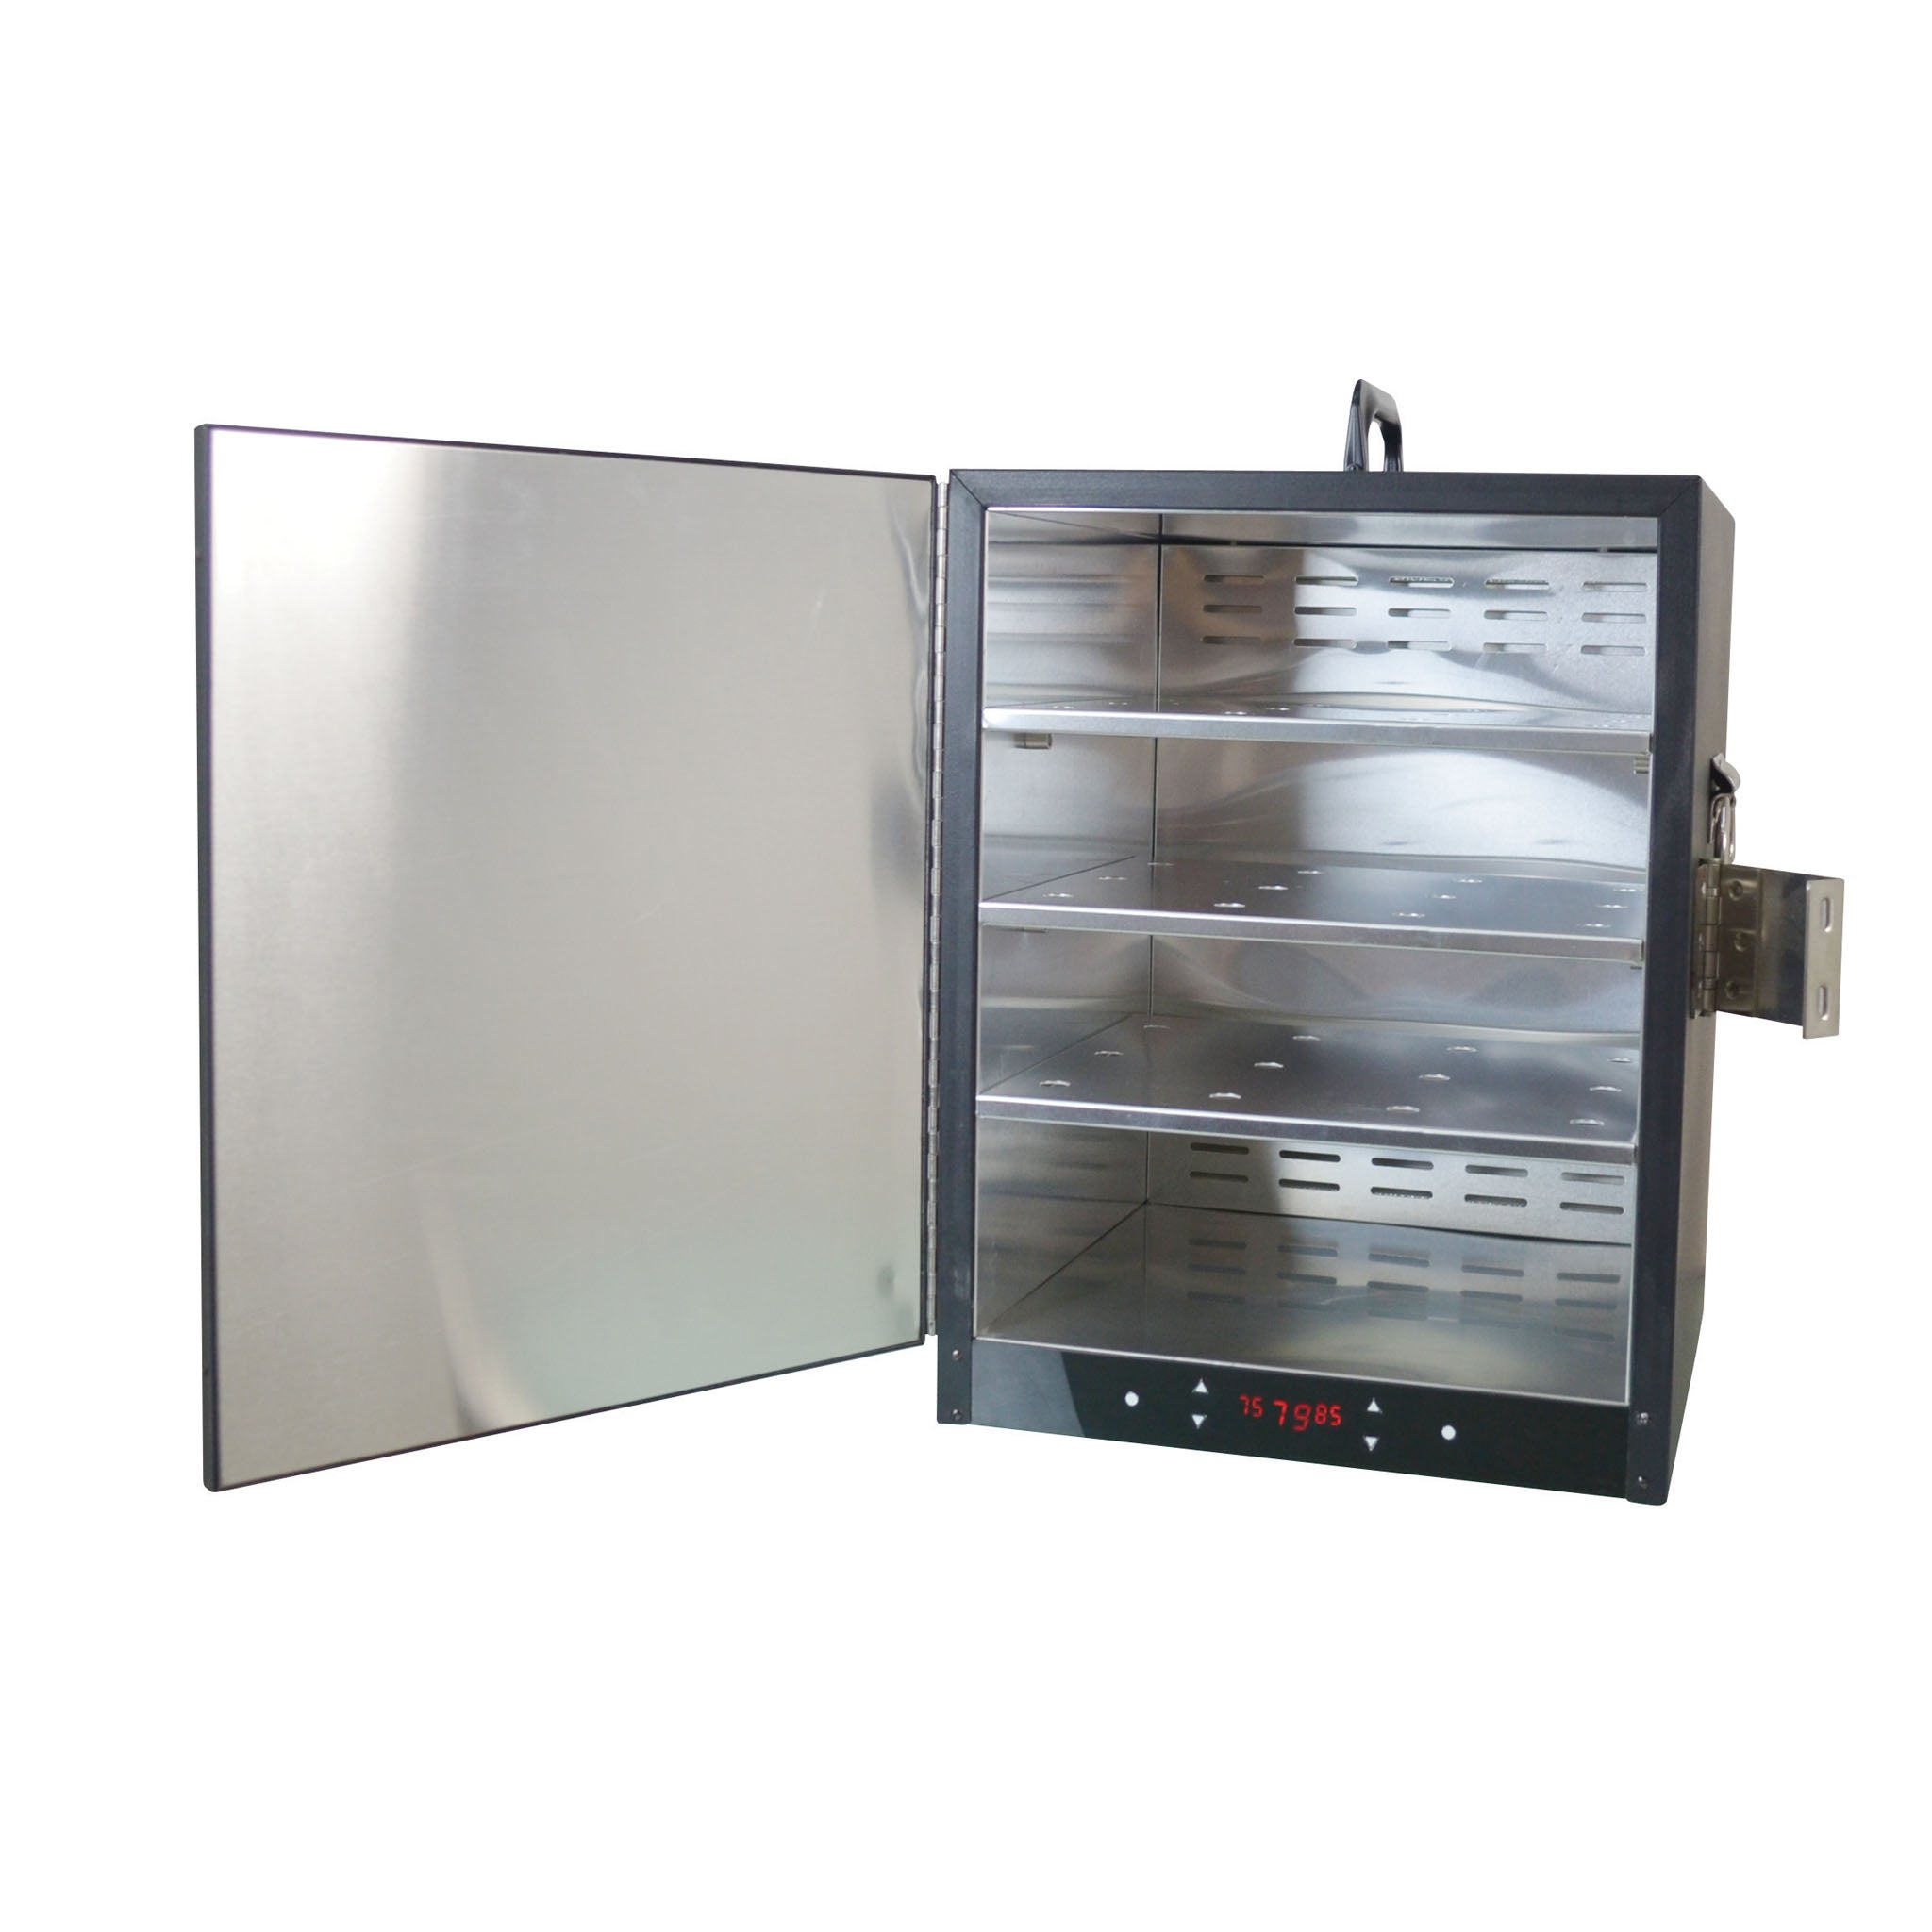 Electrical Heating Hotel Room Service Hot Box from China manufacturer -  LAICOZY